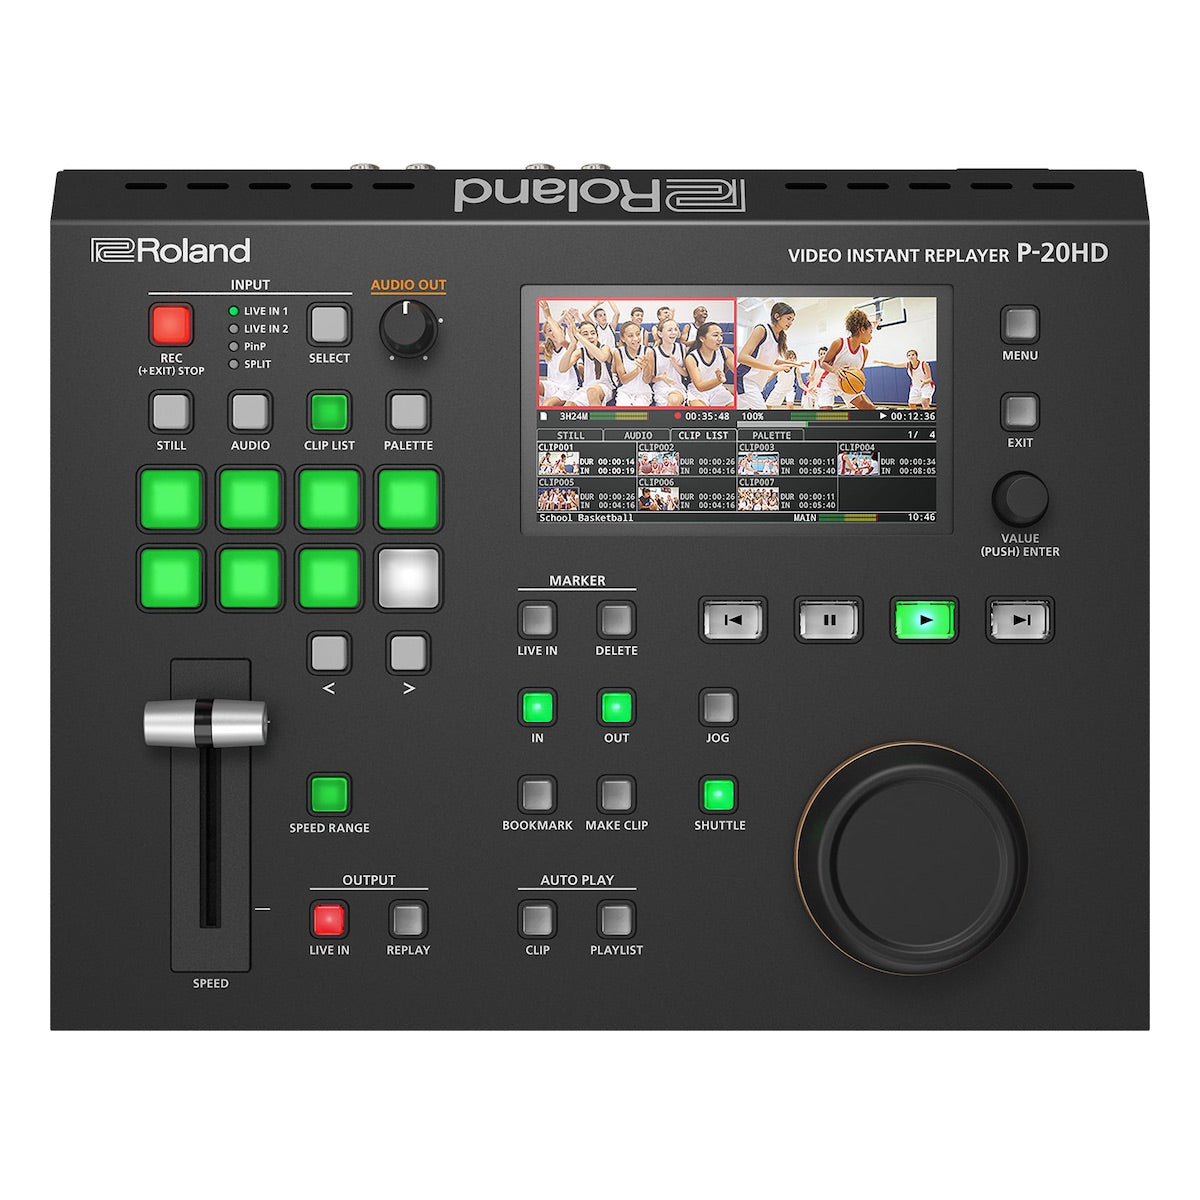 Roland P-20HD - Video Instant Replayer, top